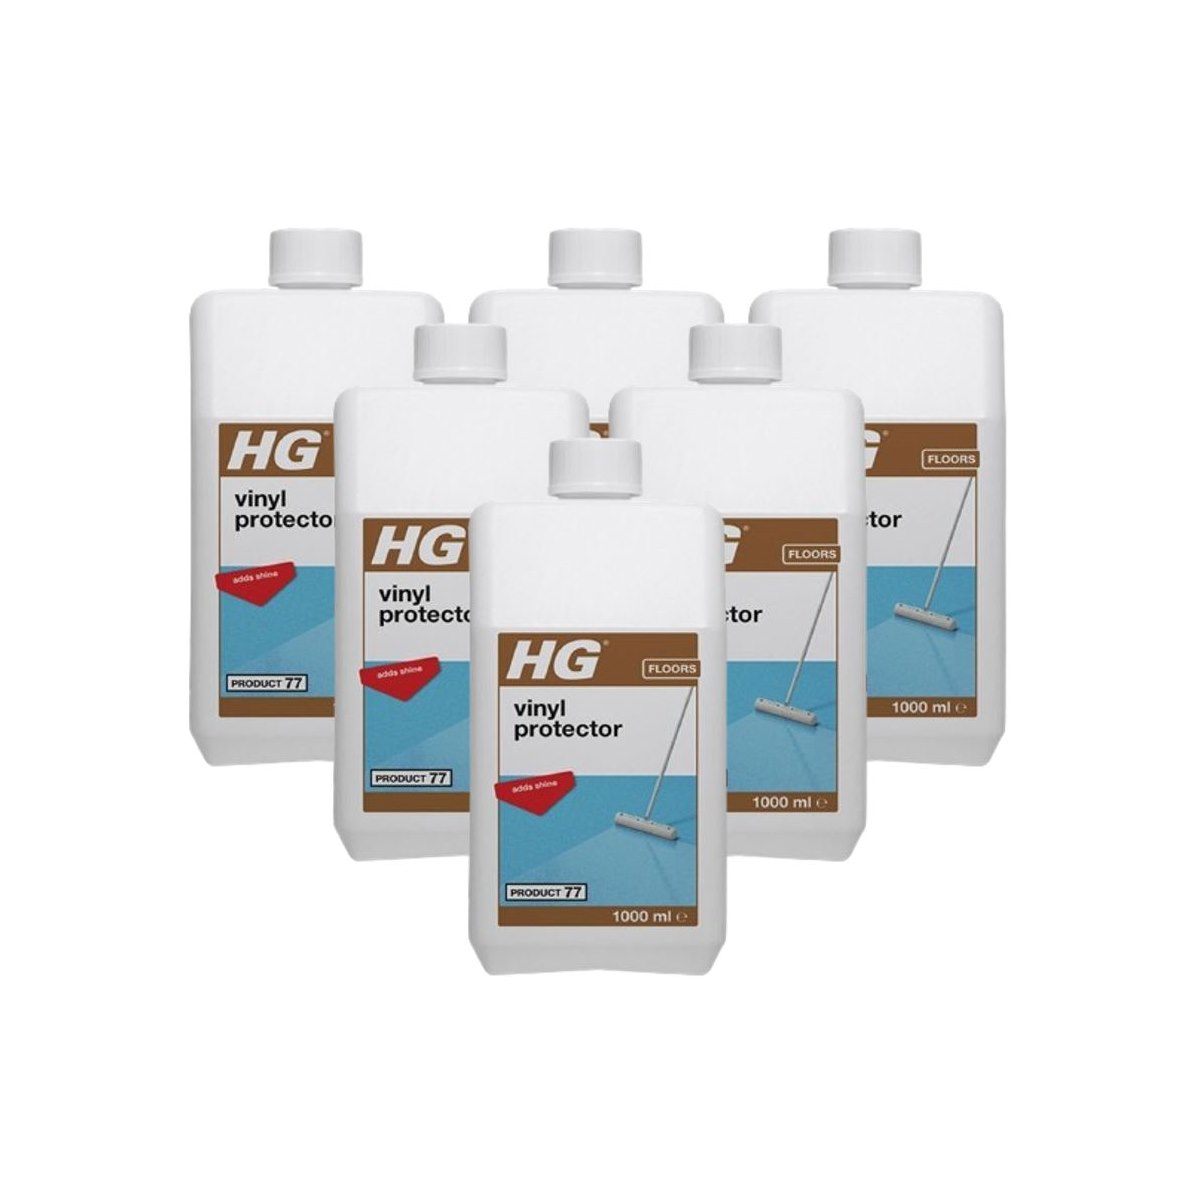 Case of 6 HG Vinyl Protector Product 77